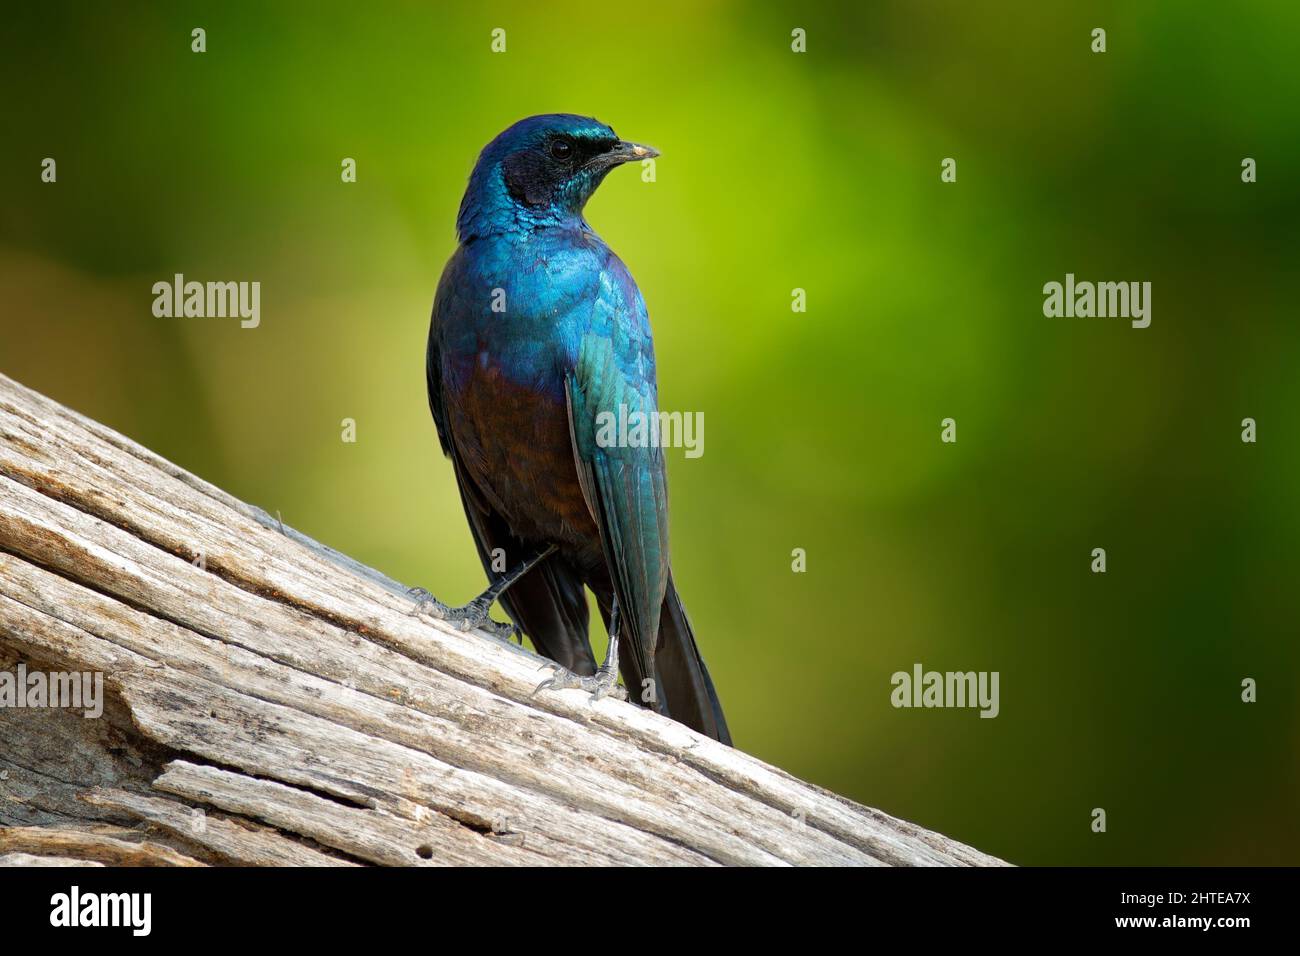 Glossy blue starling from the Botswana. Meves's Long-tailed Starling, Lamprotornis mevesii, sitting on the stone in the nature habitat. Stock Photo